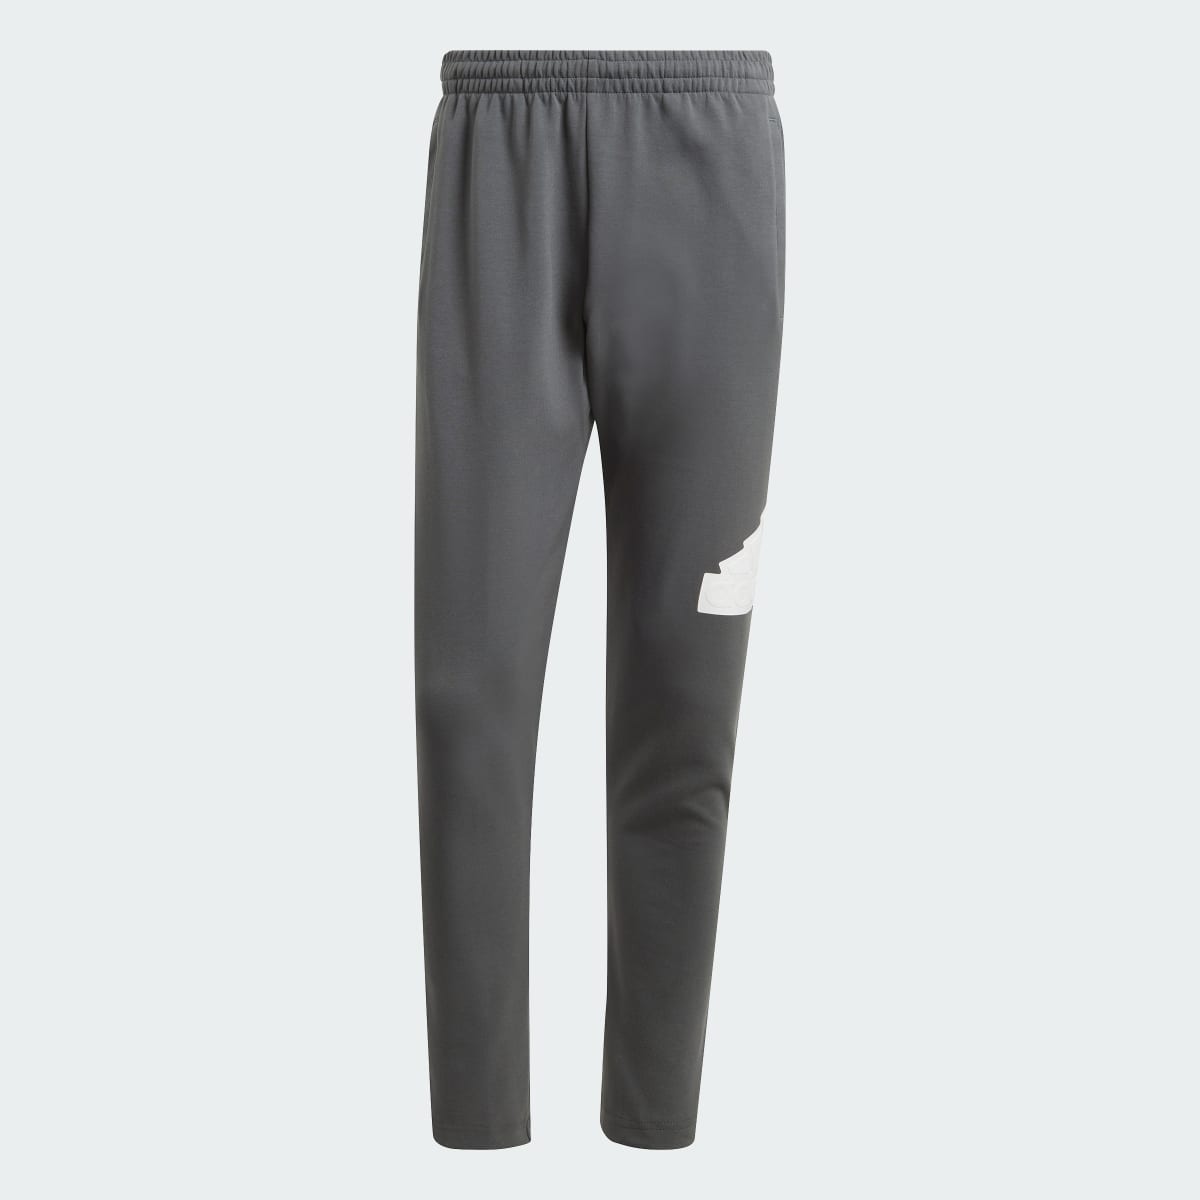 Adidas Future Icons Badge of Sport Joggers. 5